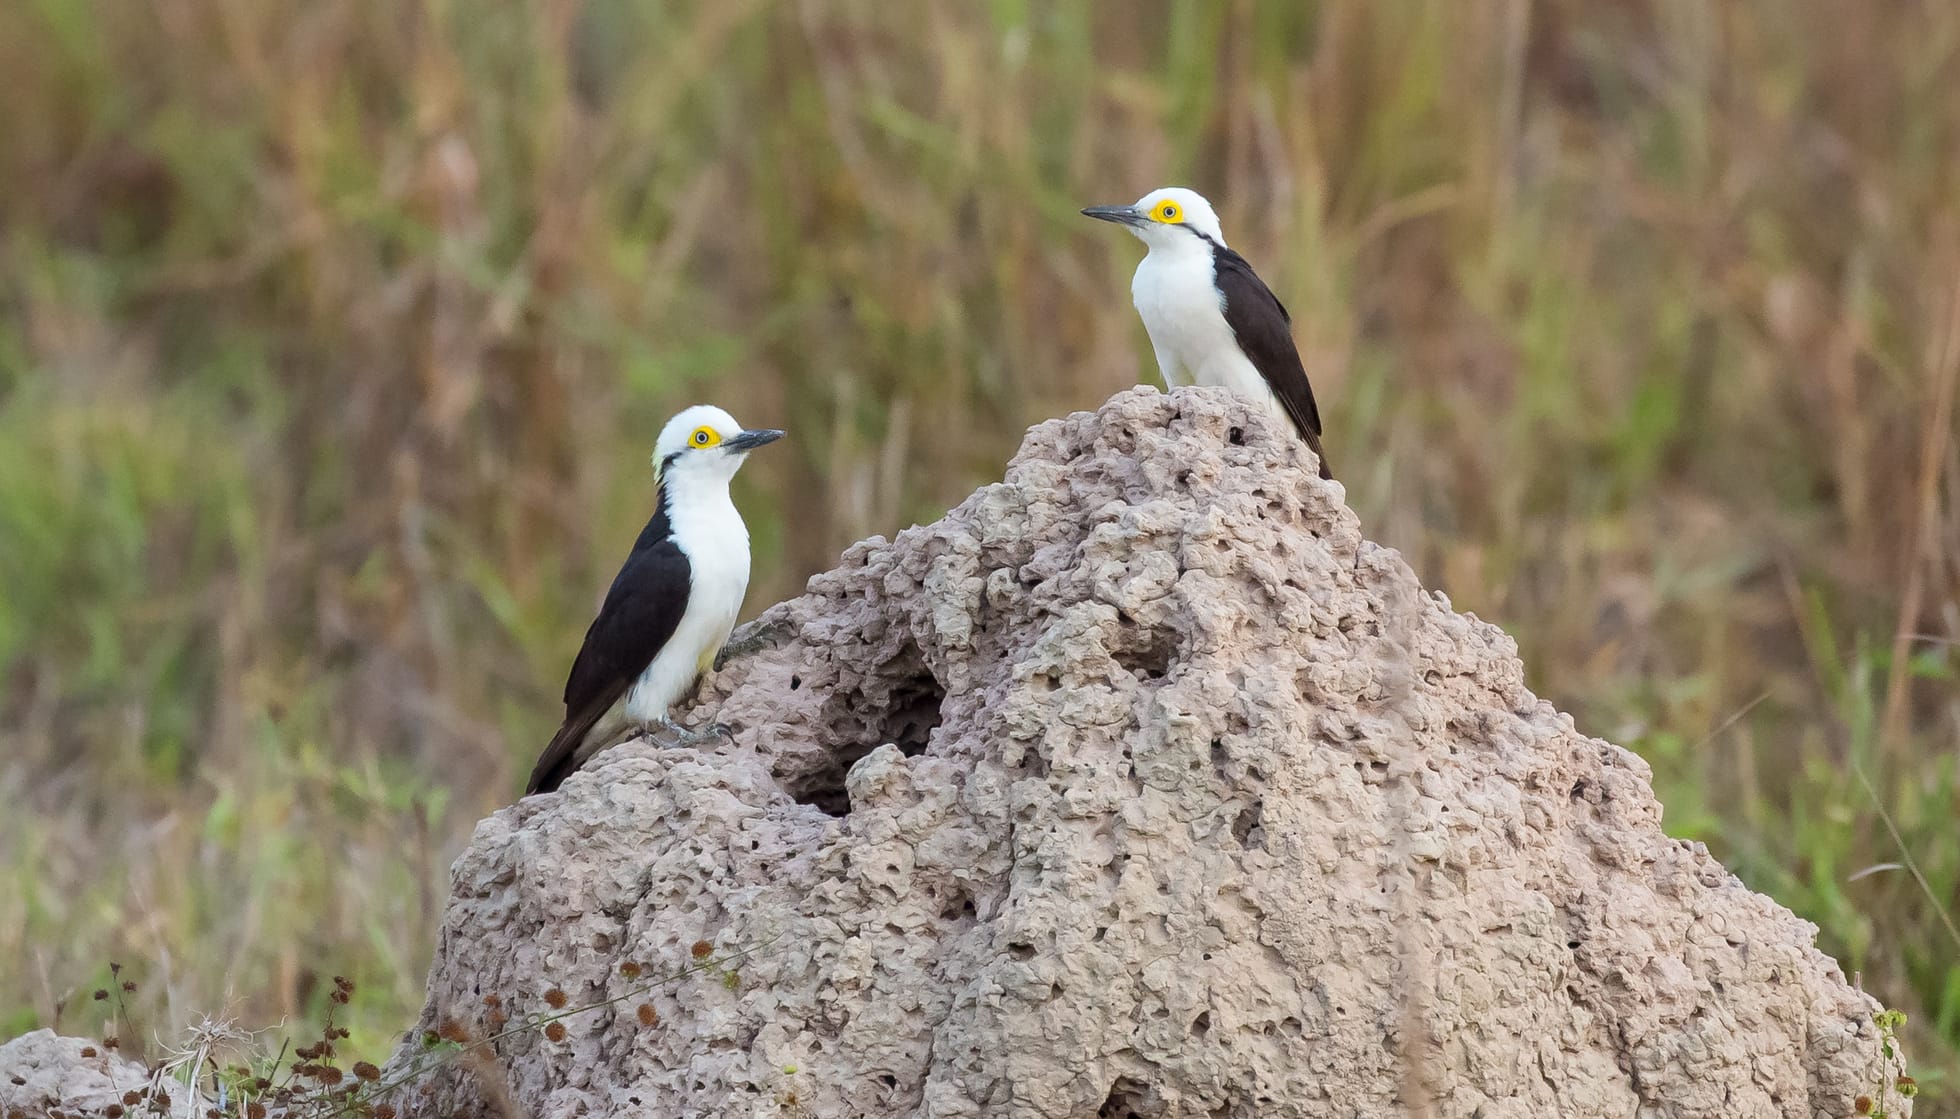 Two White Woodpeckers by their nesting hole on a termite mound 